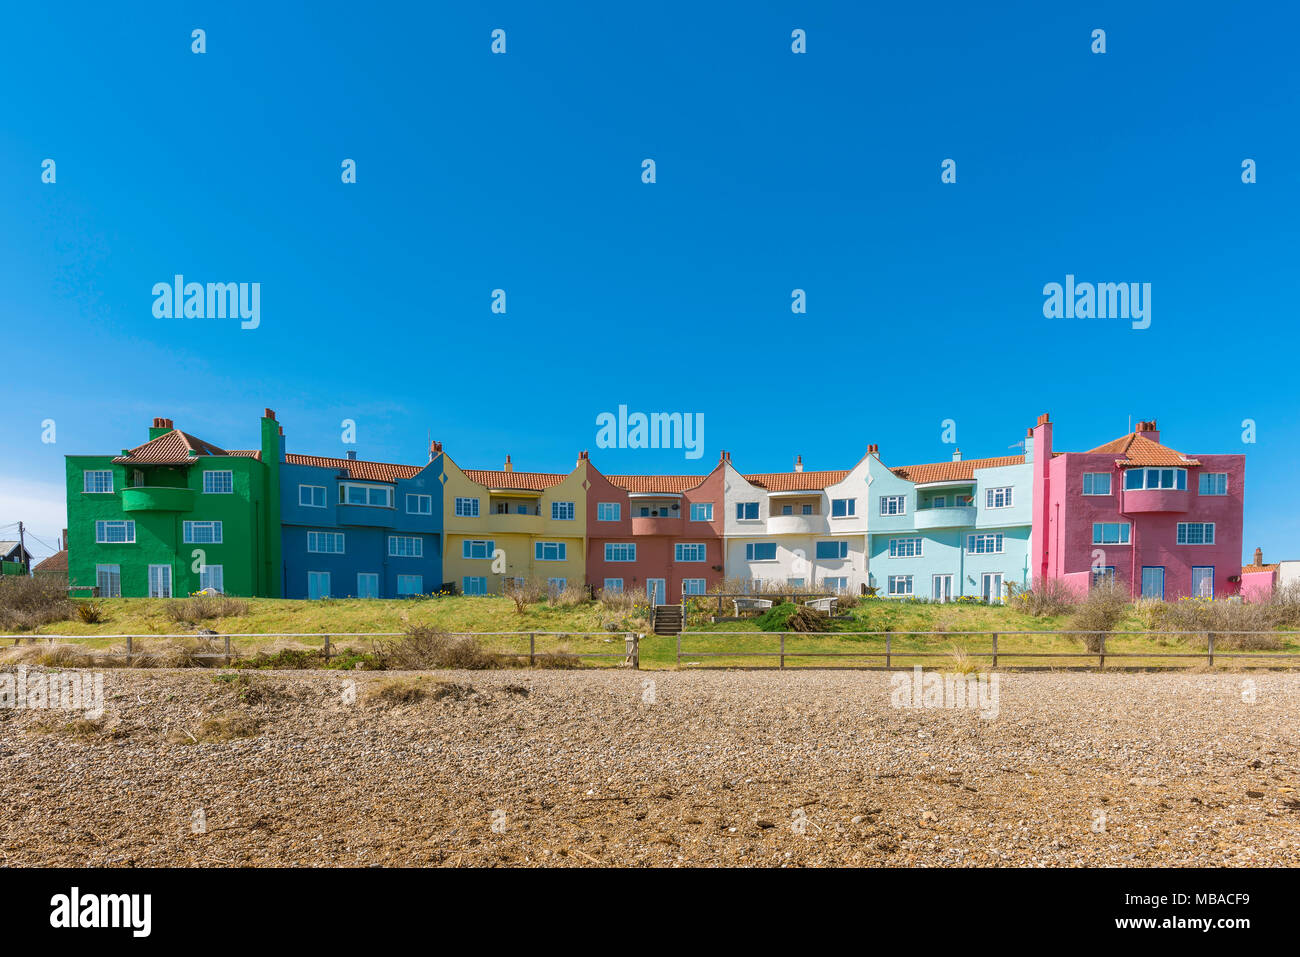 Thorpeness Suffolk UK, view of The Headlands, a colorful row of houses dating from 1937 situated on the beach at Thorpeness on the Suffolk coast, UK. Stock Photo